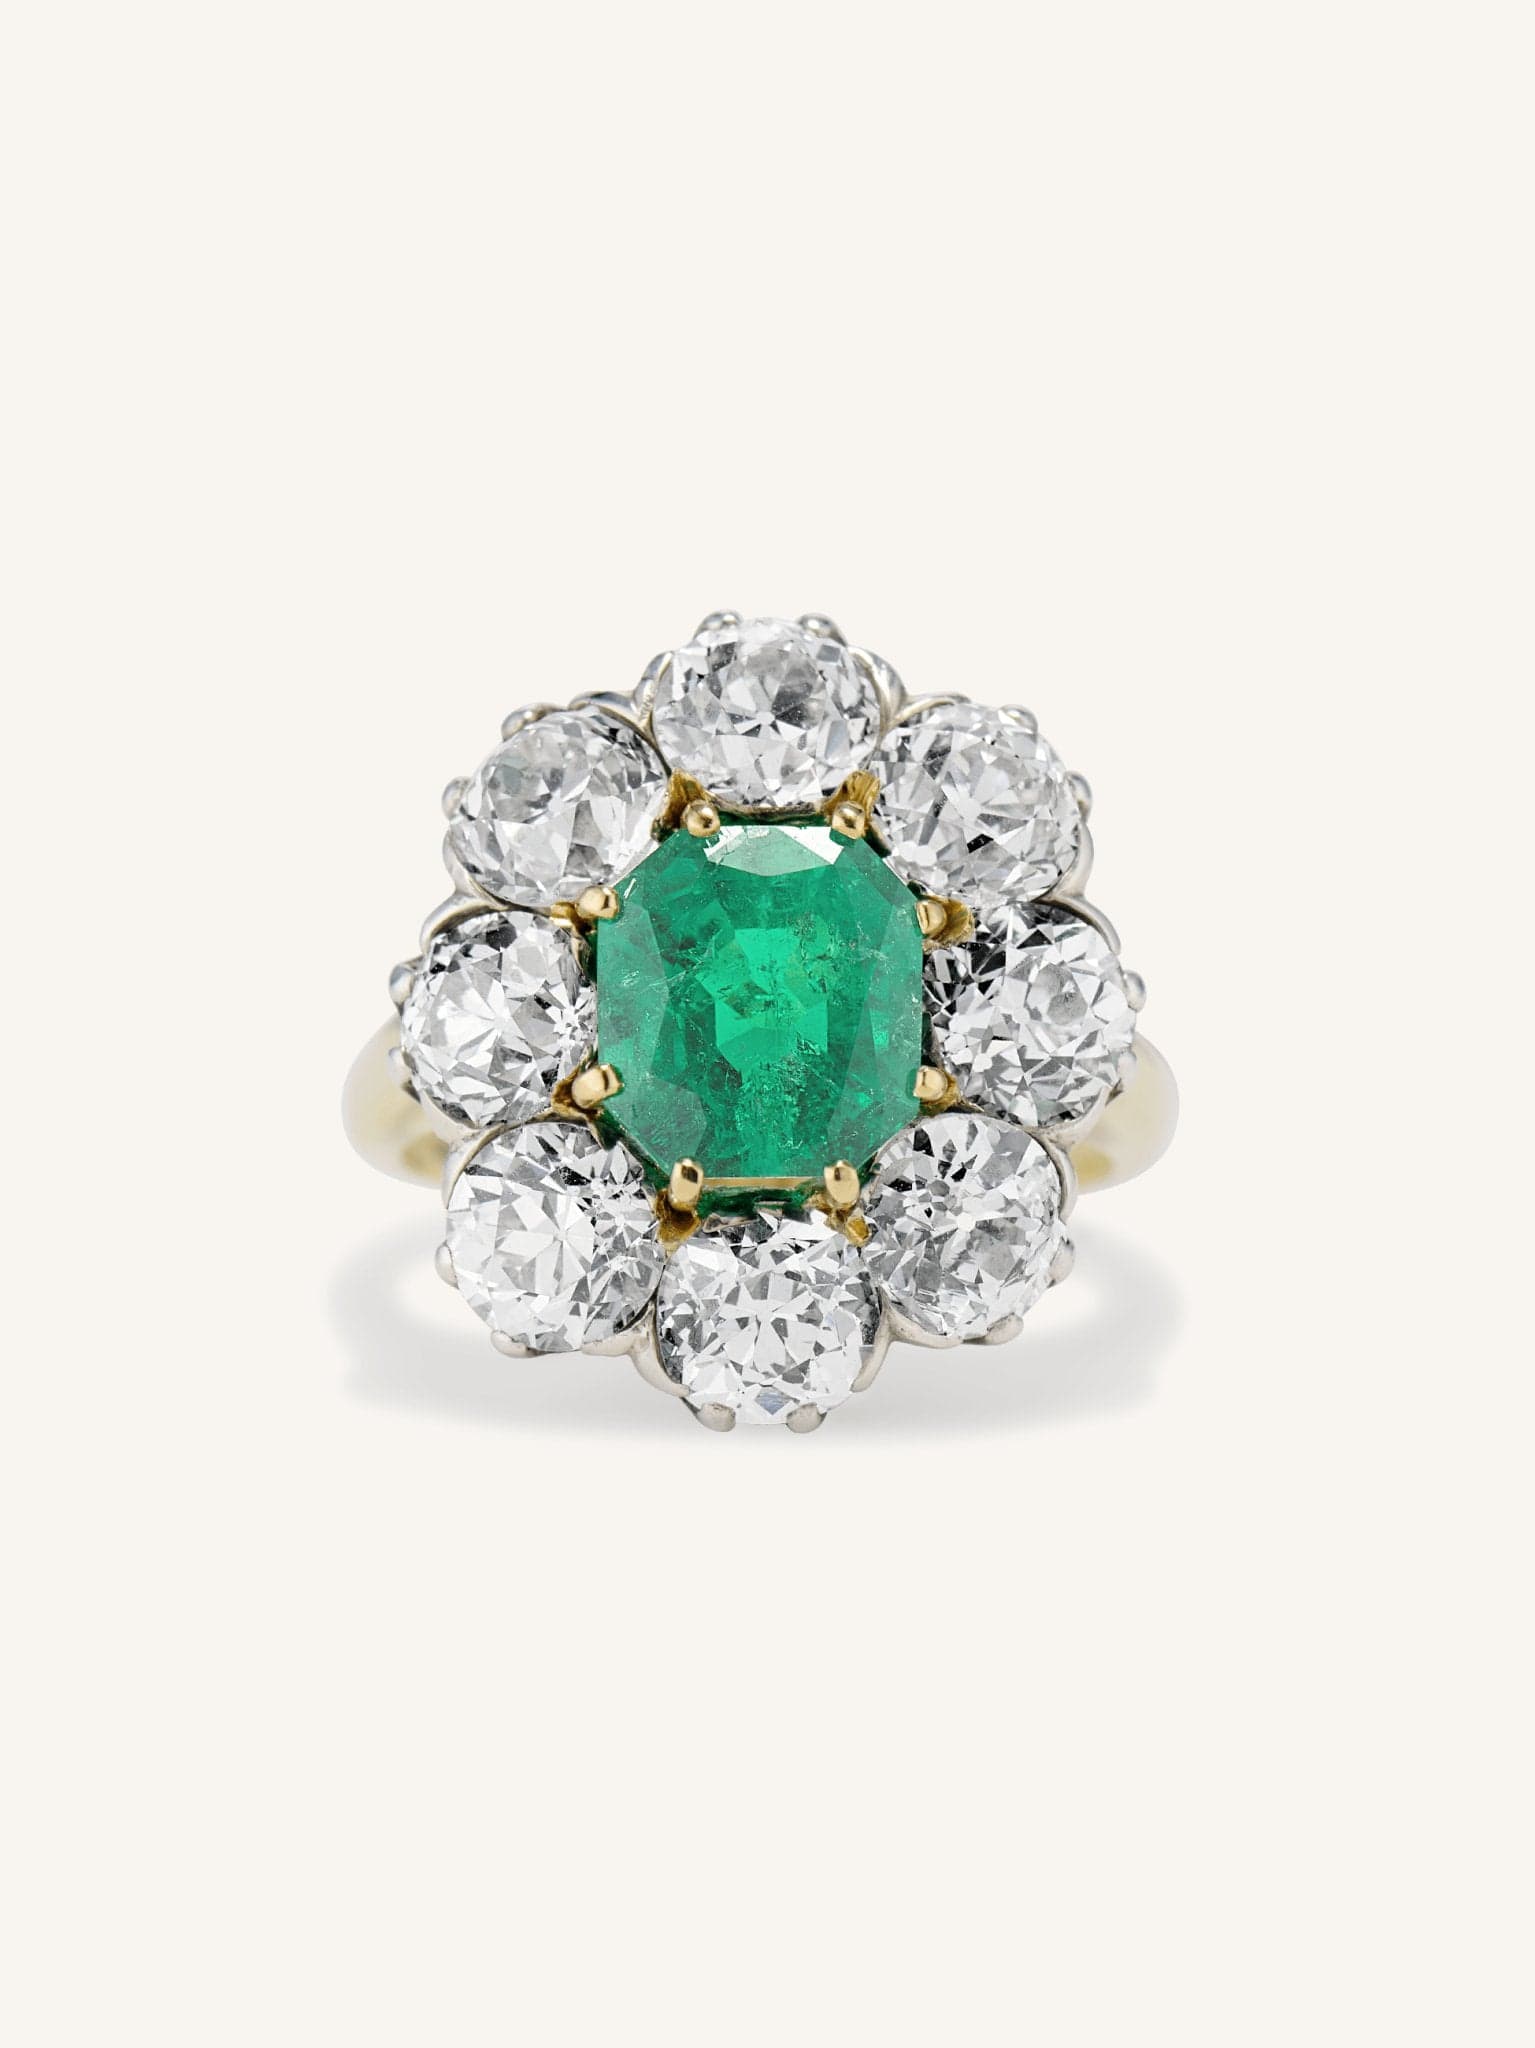 Antique emerald and diamond engagement ring | DB Gems